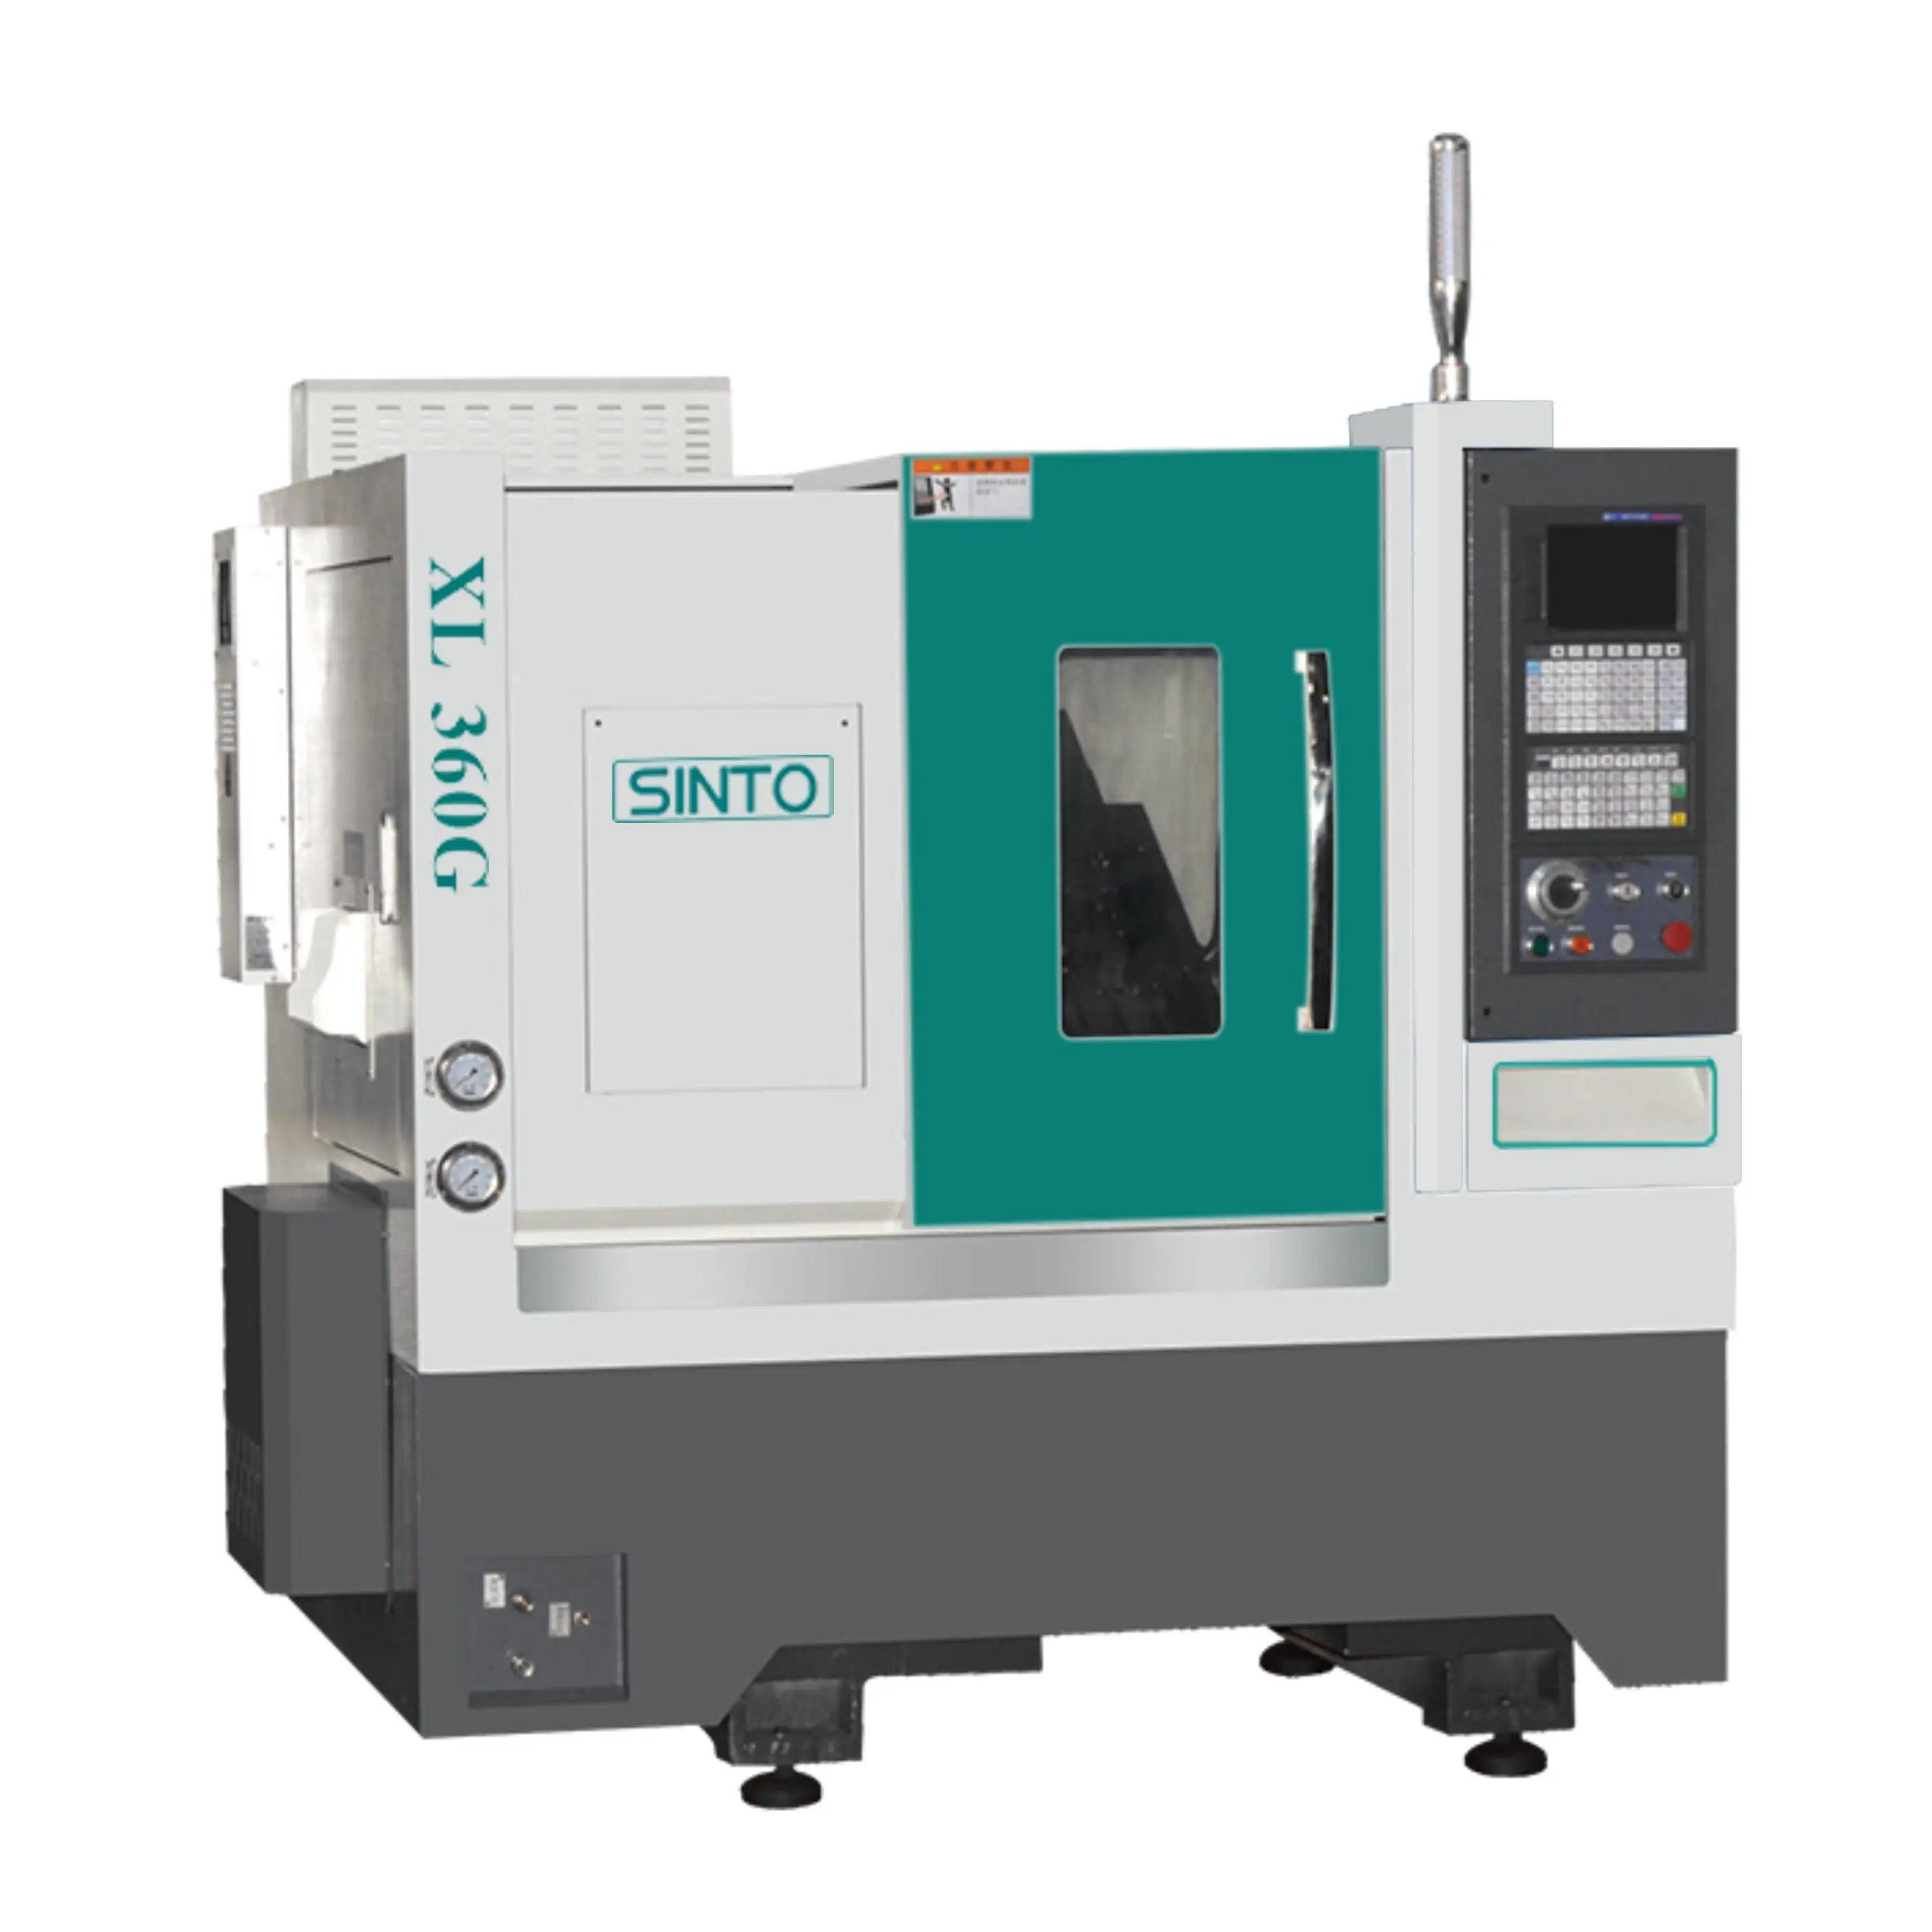 SINTO XL360G High Standard CNC Lathe with Fixed Tool and Gang-type Structure